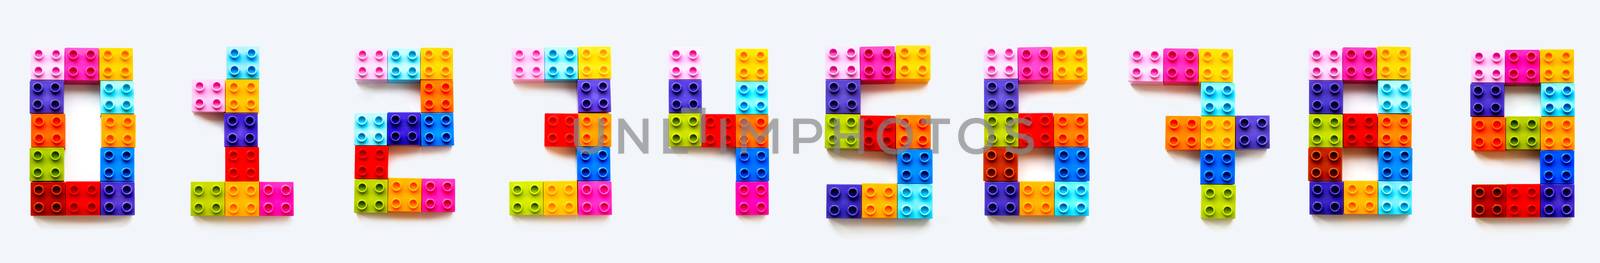 Set of numbers from 0 to 9 made of colorful constructor blocks. Toy bricks lying in order from zero to nine. Education process - learning numbers with child using multicolored toy details.